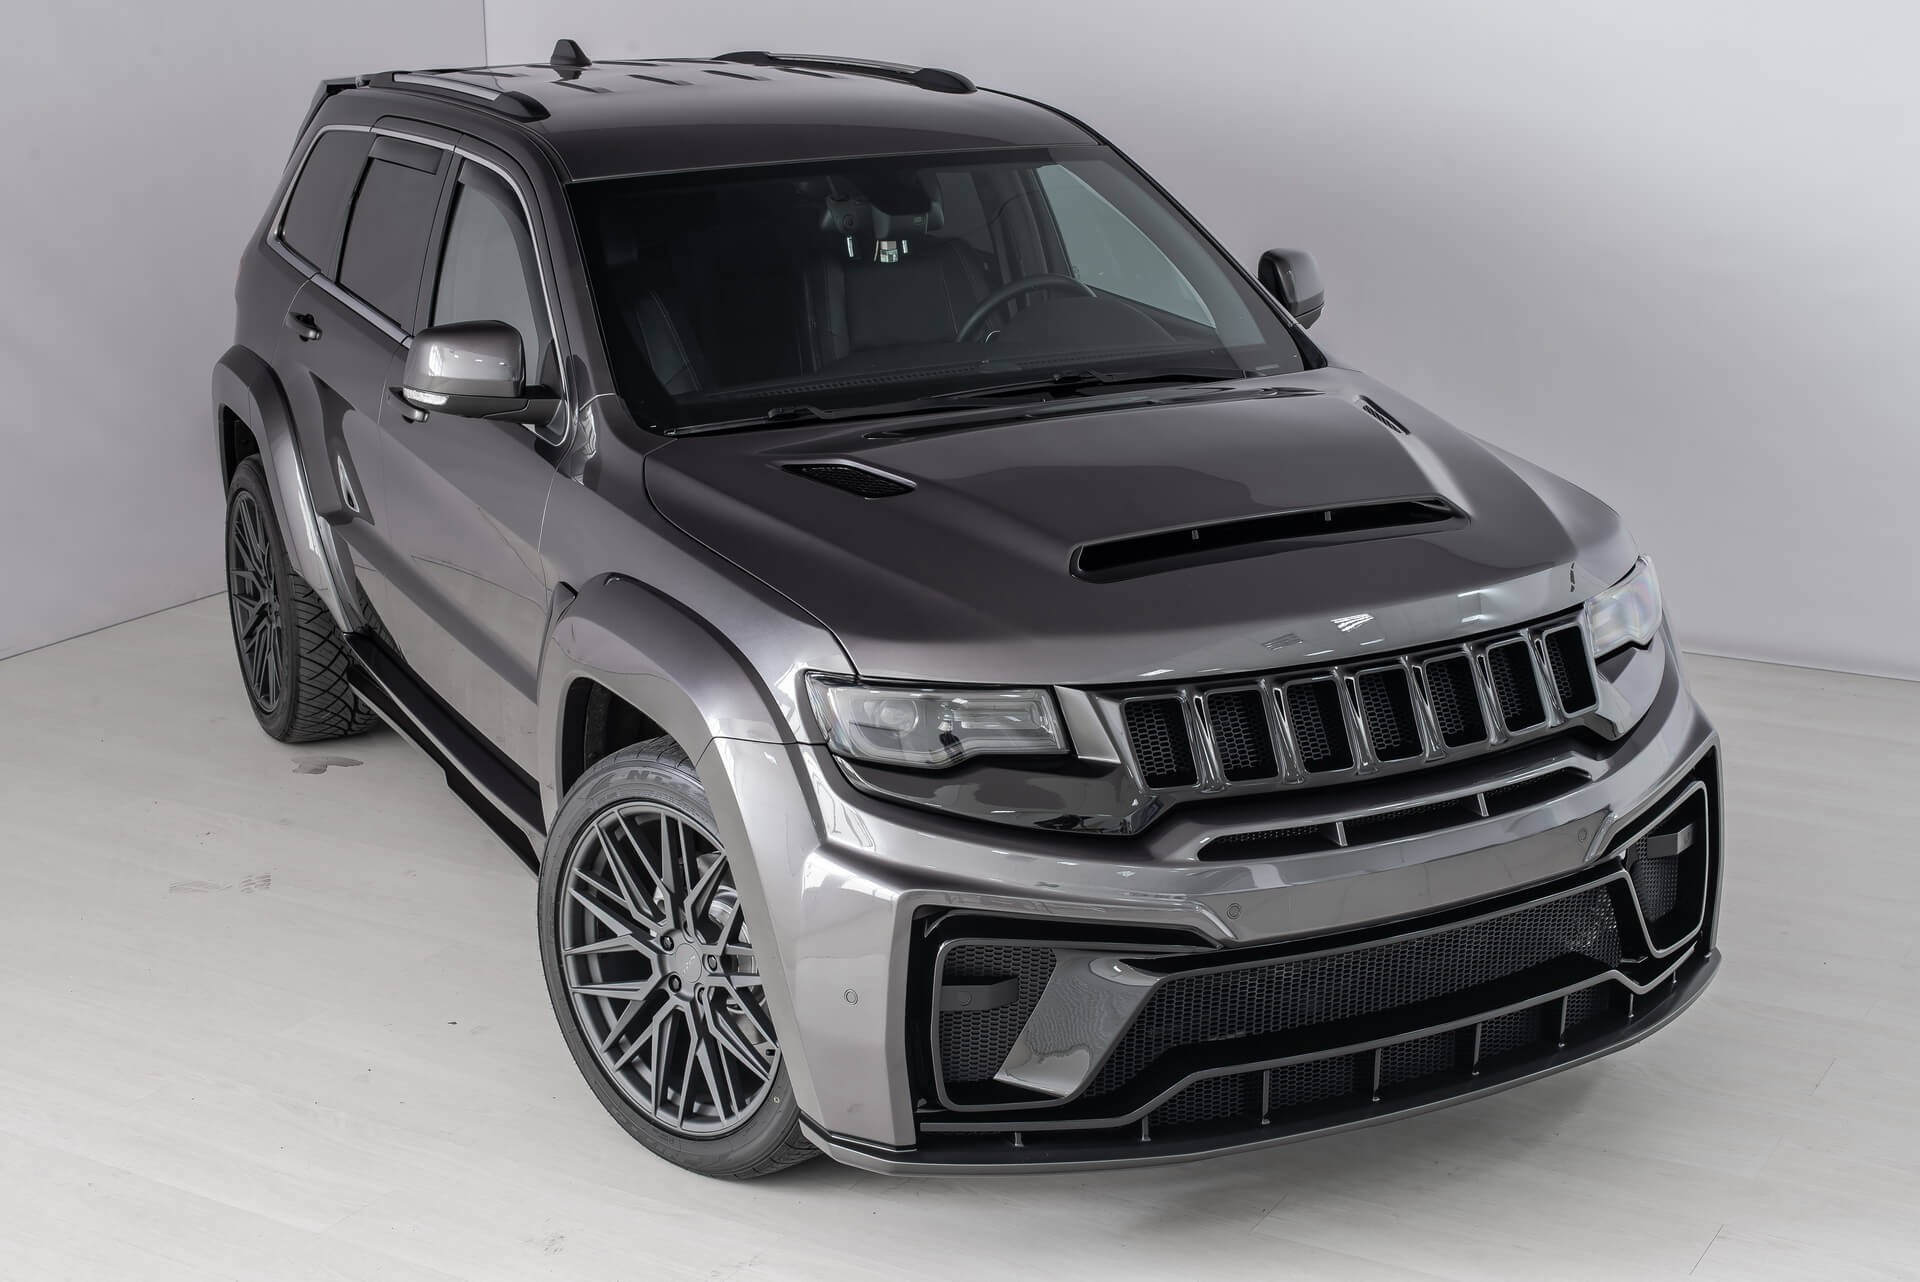 Check price and buy SCL Performance Titan  body kit for Jeep Grand Cherokee